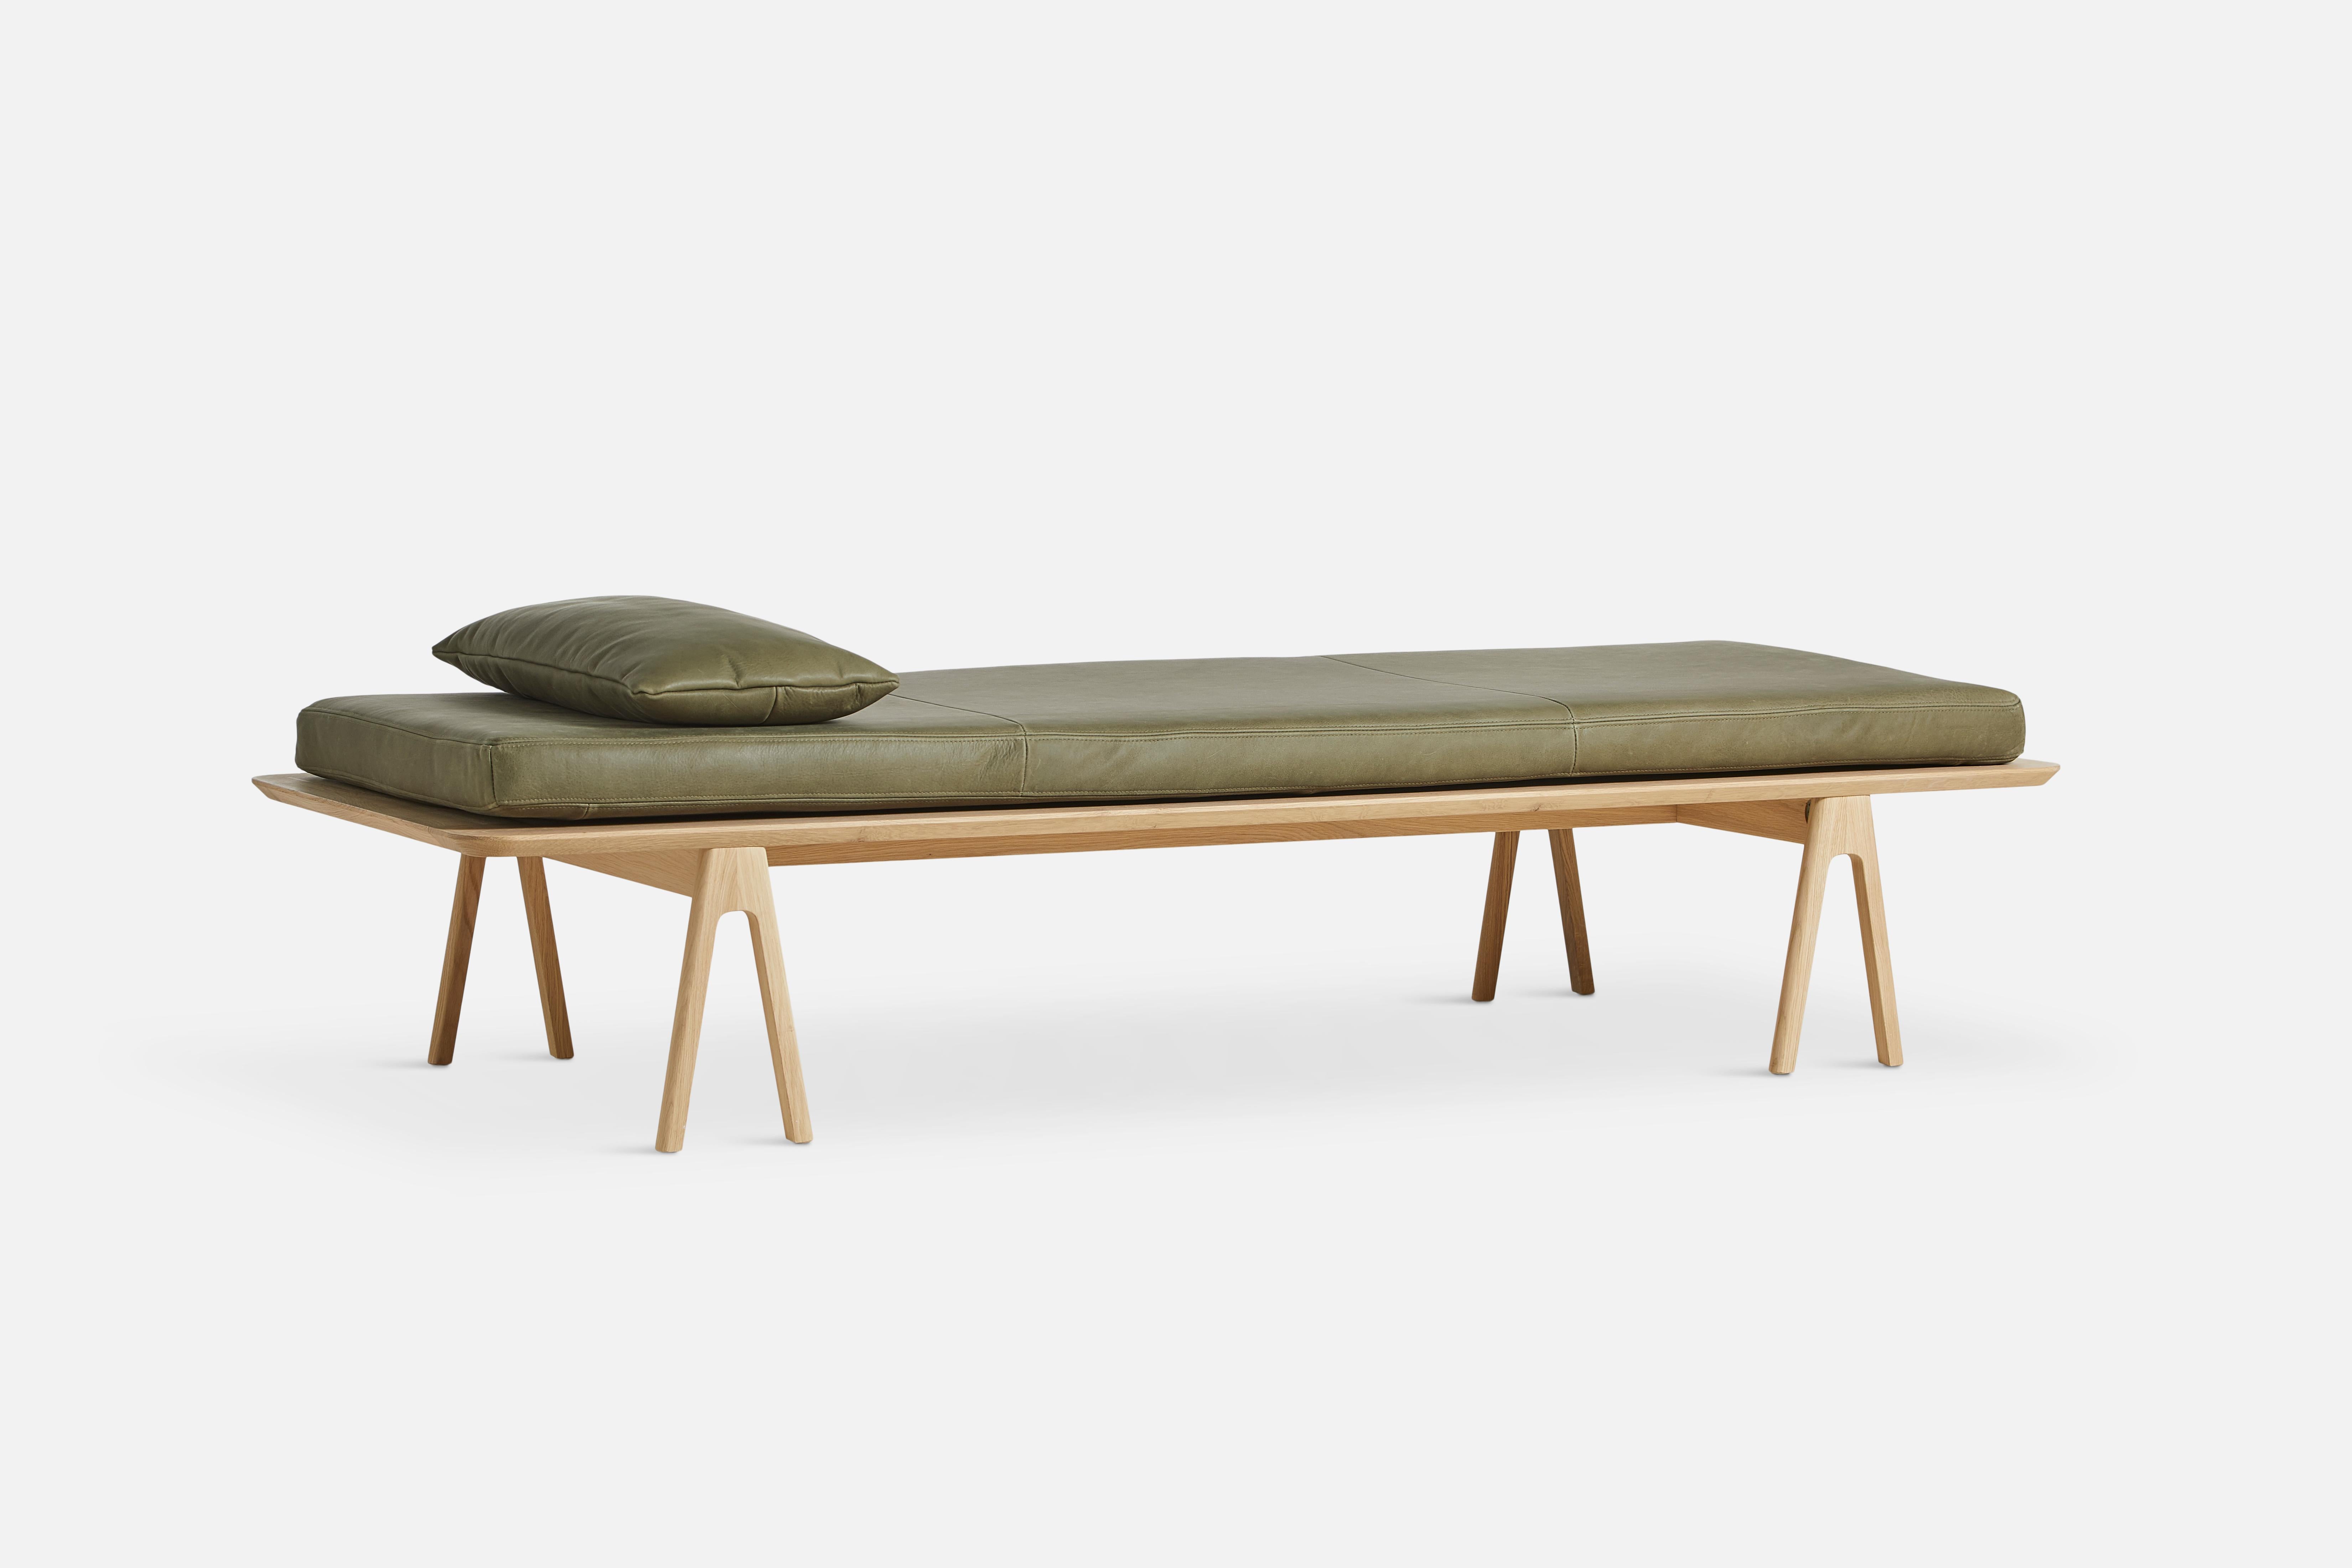 Moss Green Oak Level Daybed by Msds Studio
Materials: Camo Leather, Foam, Oak
Dimensions: D 76.5 x W 190 x H 41 cm // D 23.5 x W 67 x H 8.5 cm

The founders, Mia and Torben Koed, decided to put their 30 years of experience into a new project. It was